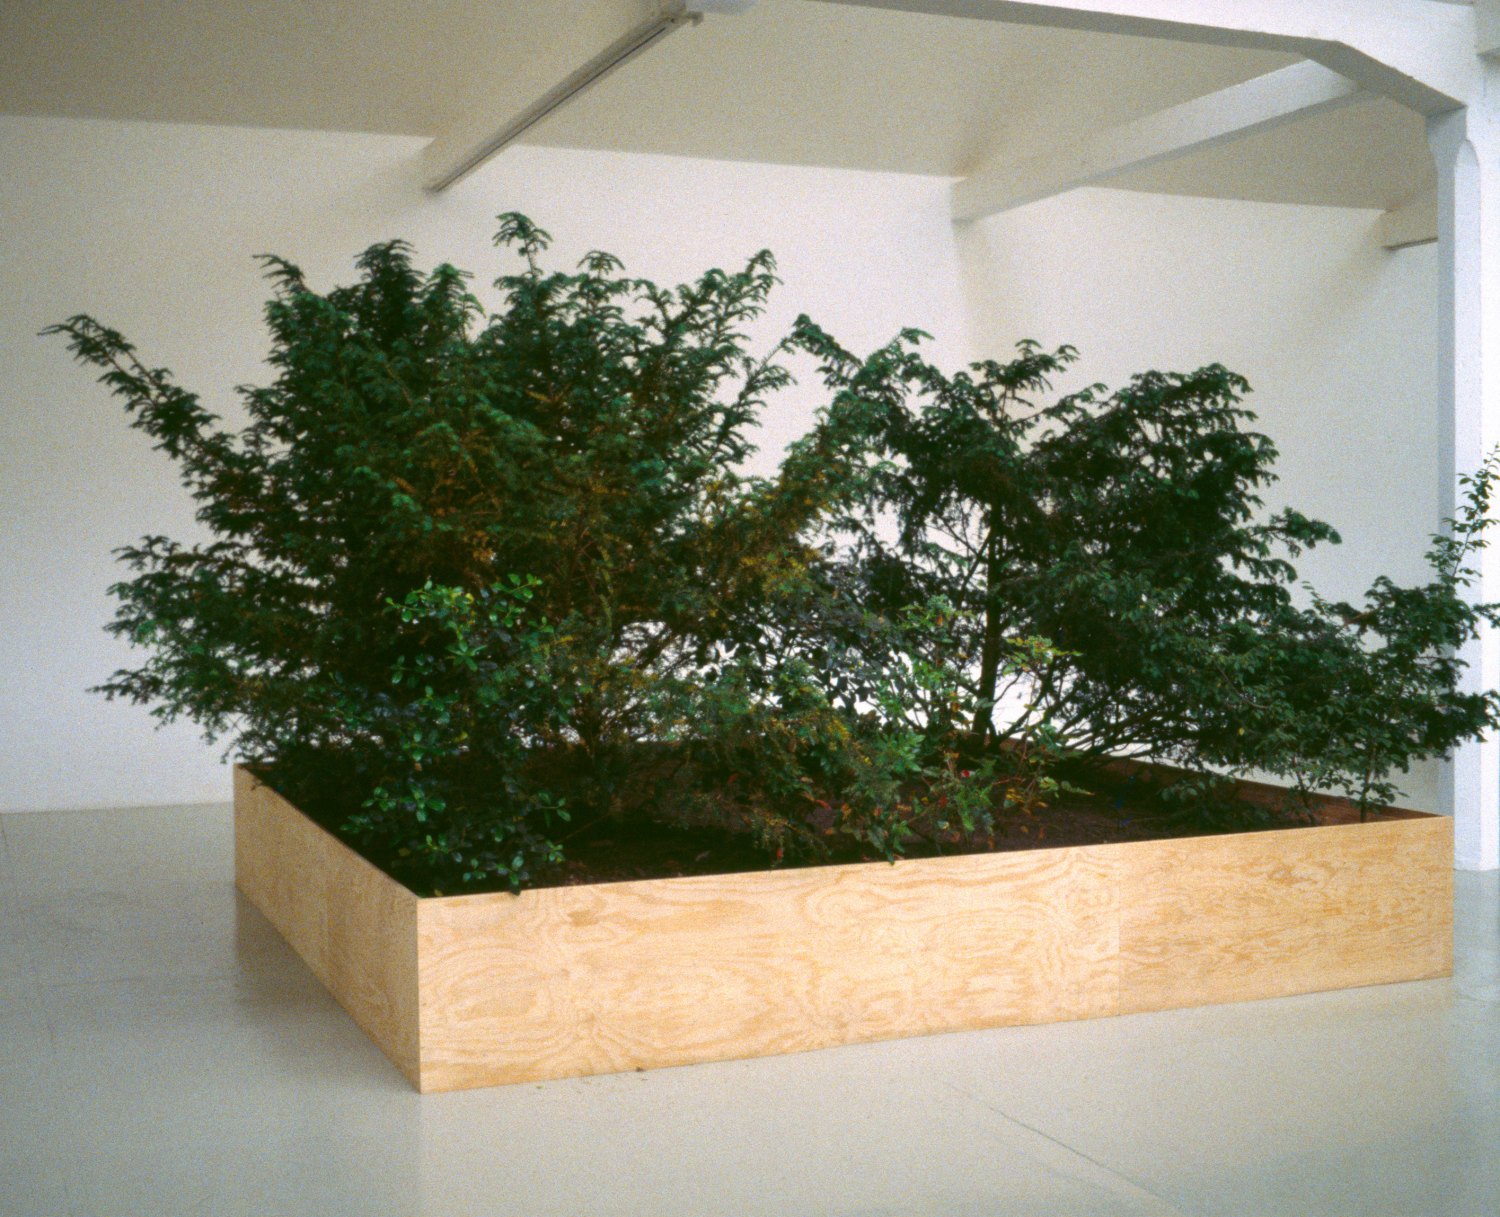 Tom Burr  Circa ’77, 1995 Wood, soil, trees, found objects Installation view, Kunsthalle Zürich, 1995